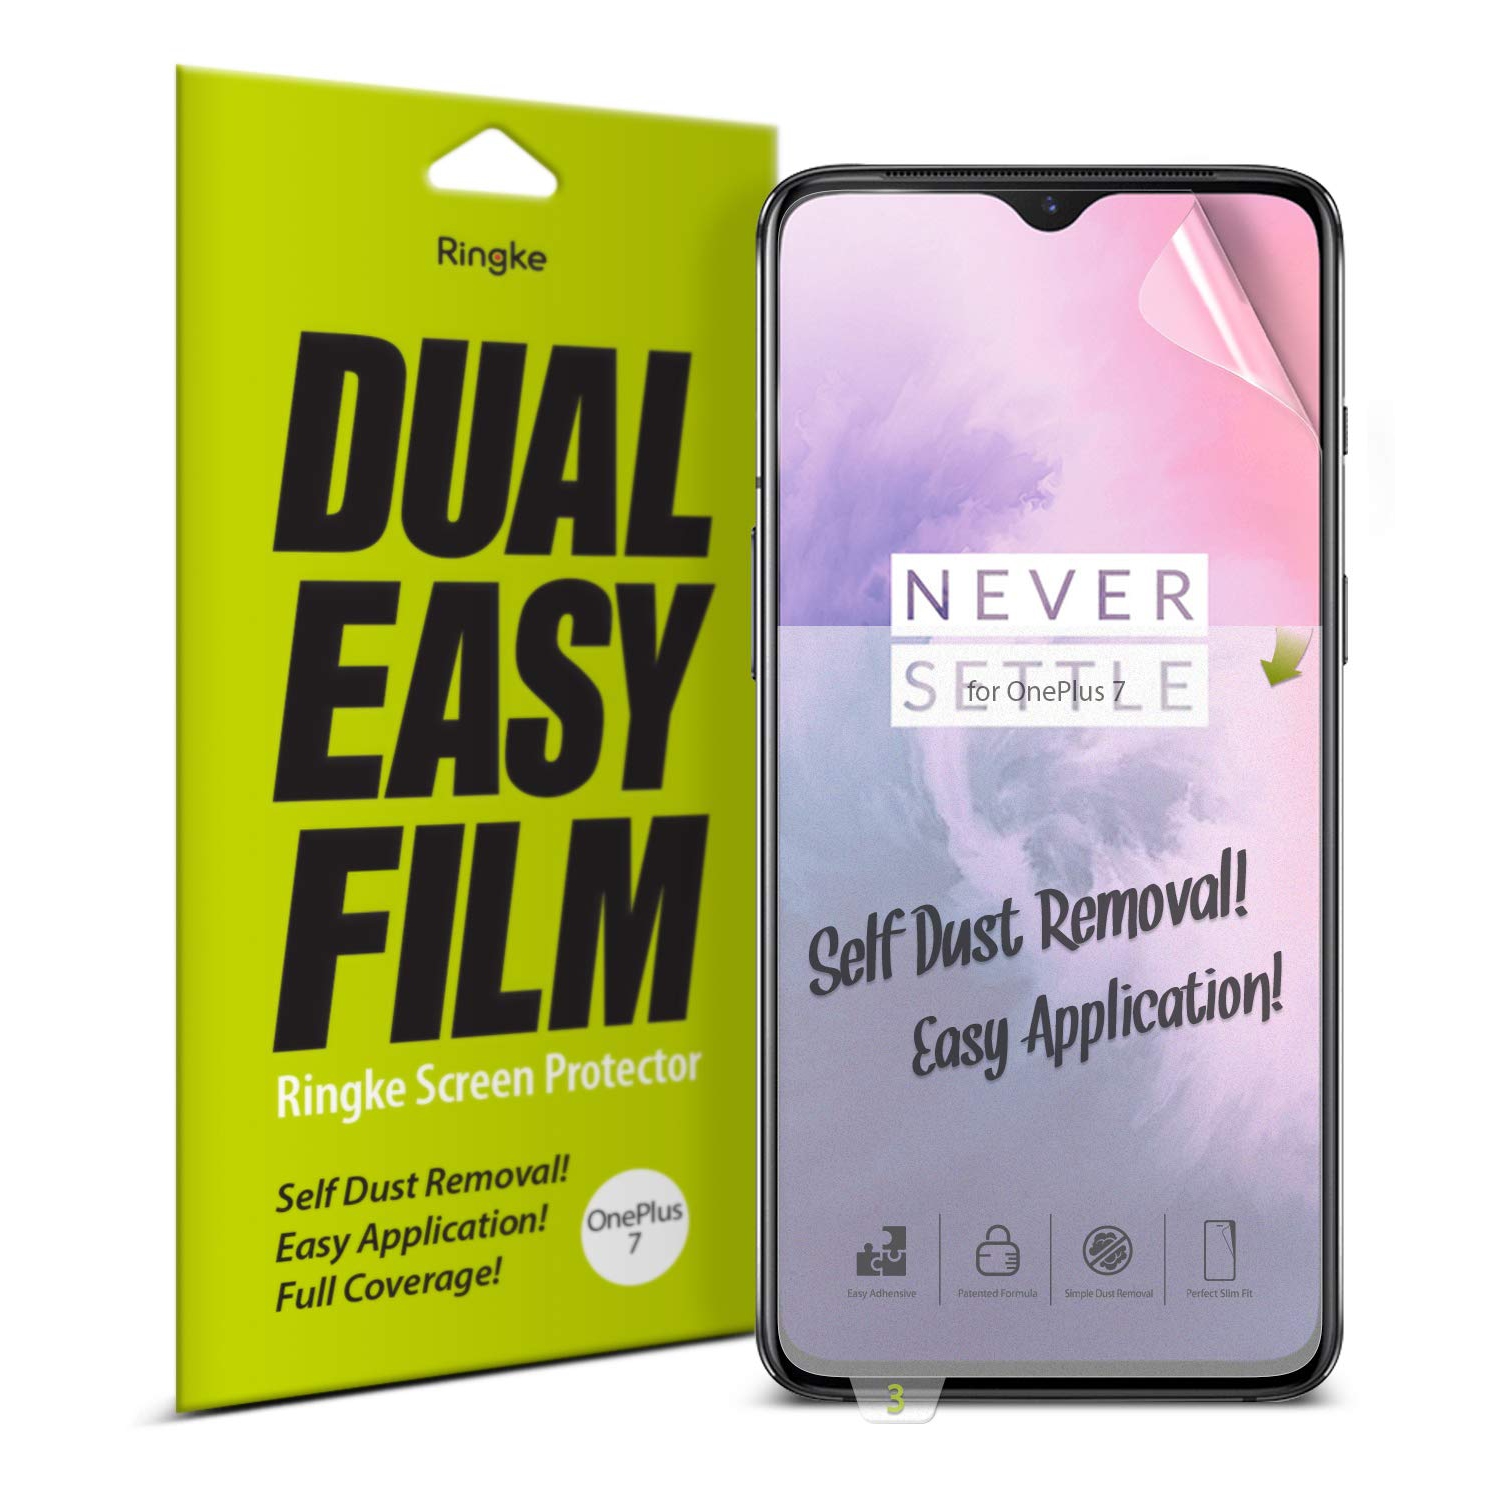 Ringke Dual Easy Film [2 Pack] for OnePlus 7, High Resolution Easy Application Case Friendly Screen Protector